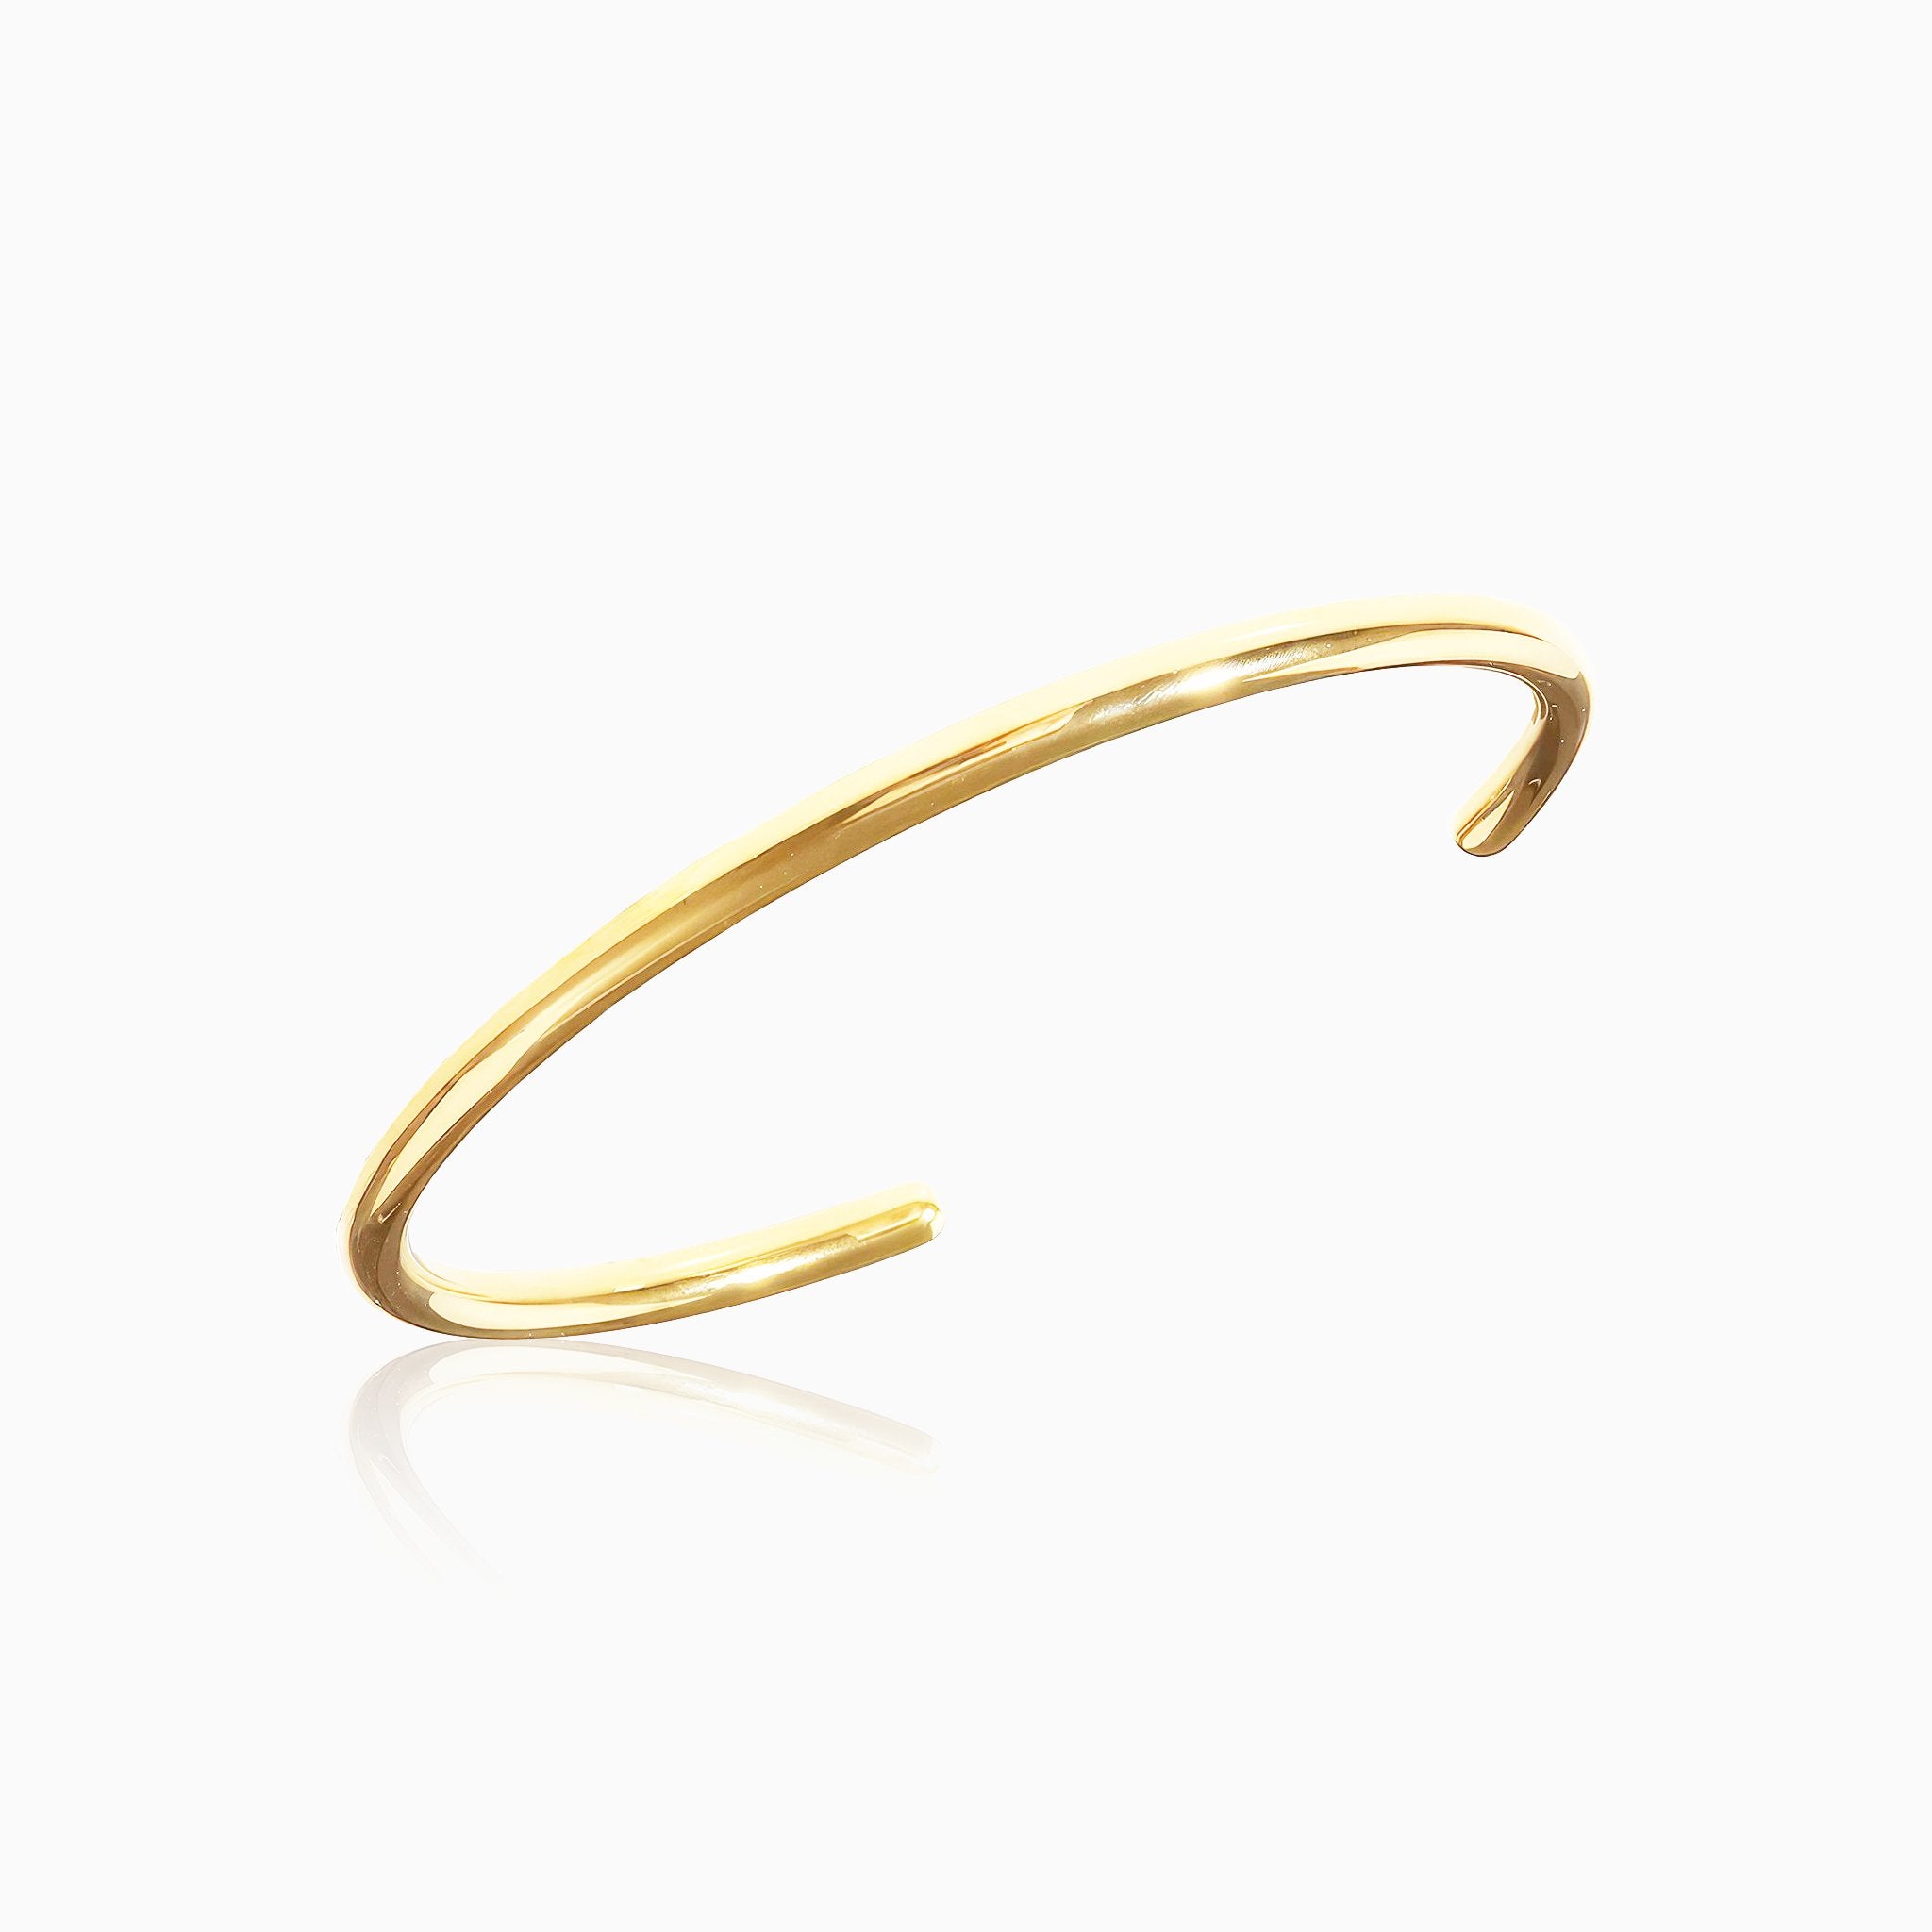 Open Design Bangle - Nobbier - Bangle - 18K Gold And Titanium PVD Coated Jewelry